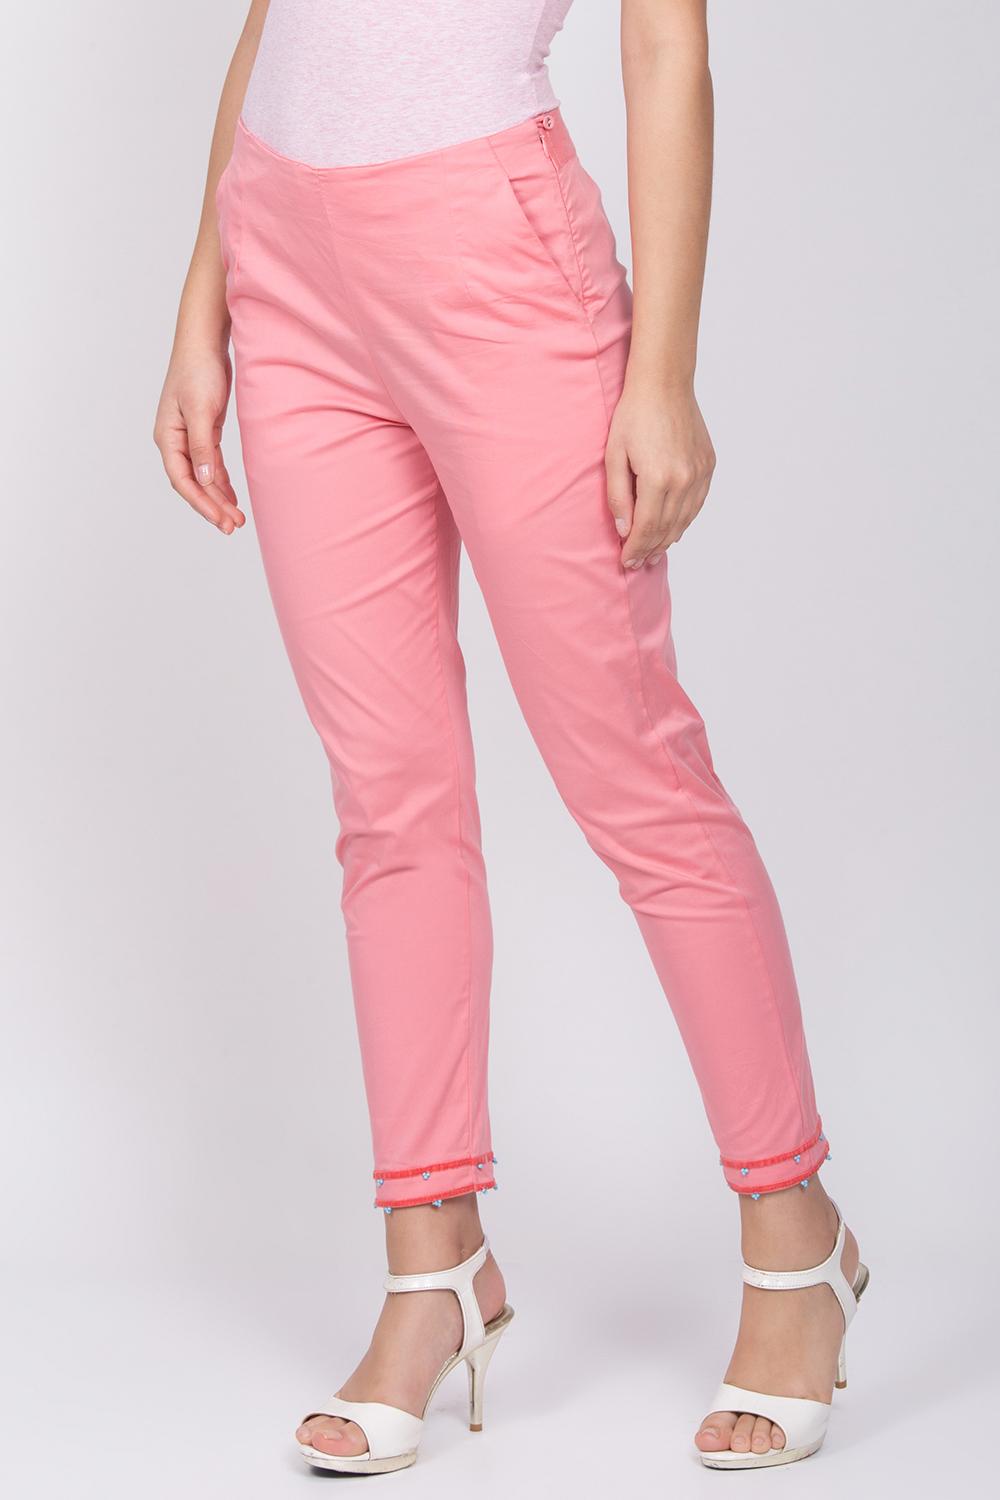 Buy Online Peach Poly Lycra Slim Pants for Women at Best Price at ...